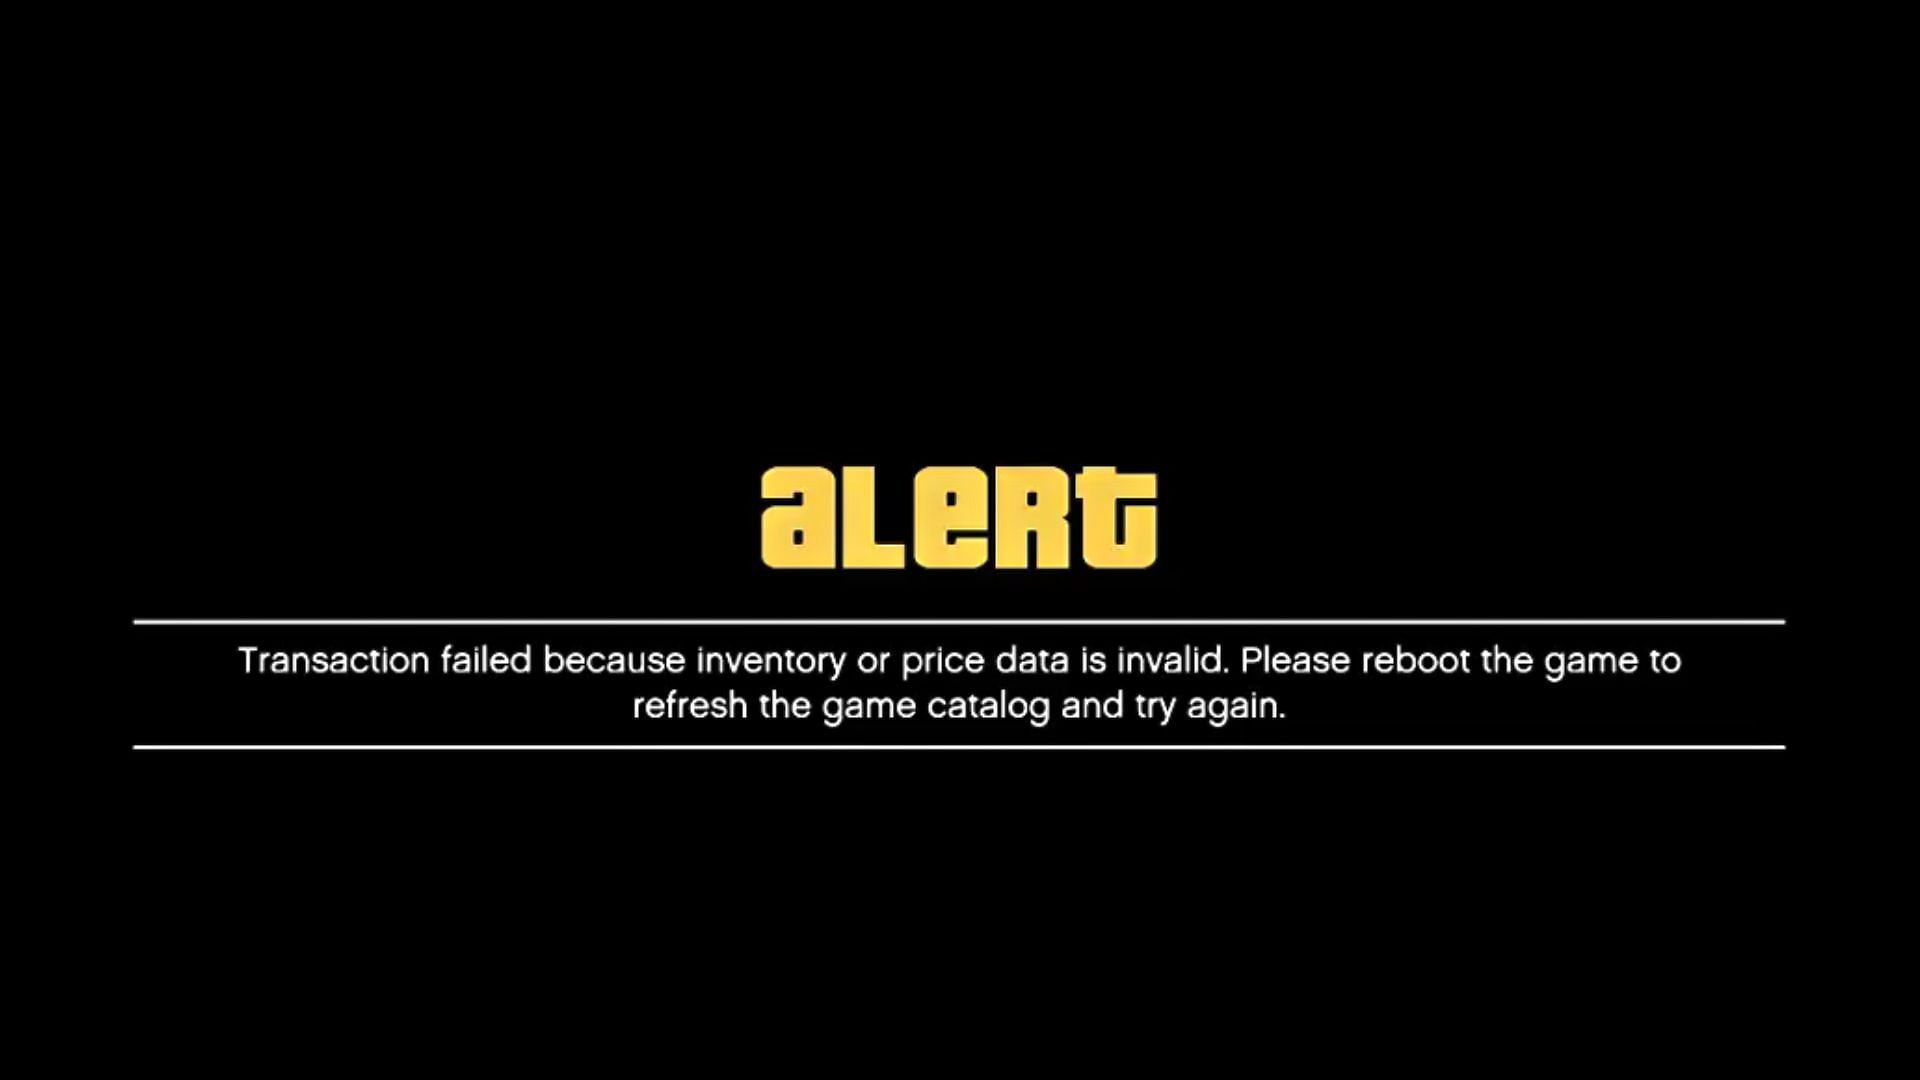 Street Dealers payout limited to $80,000 on PC (Image via Twitter @Marius2360)